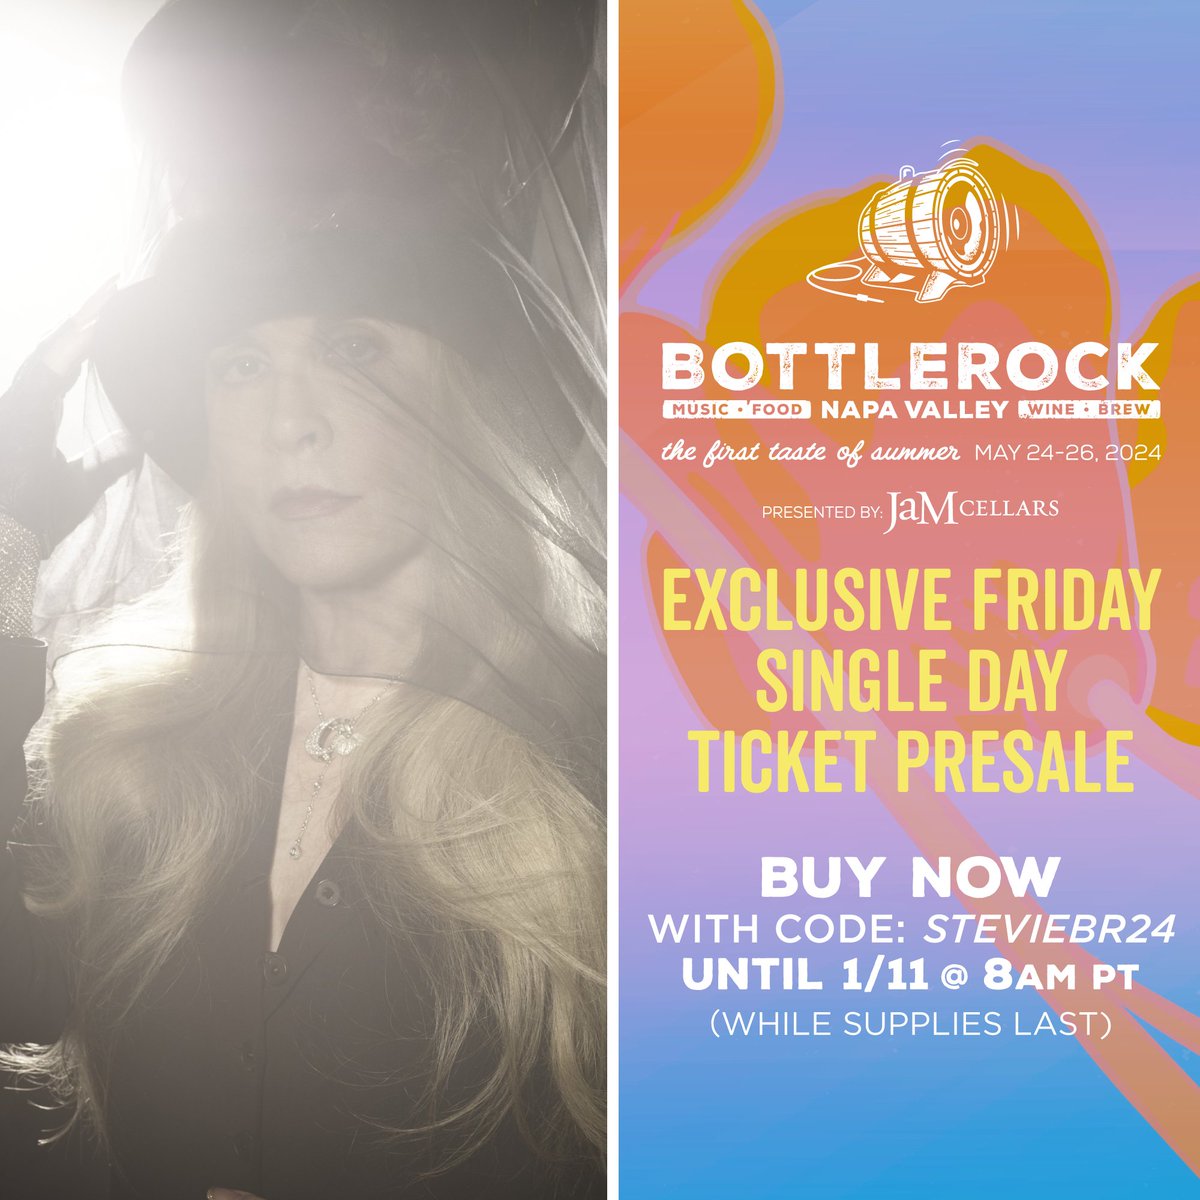 My @BottleRockNapa pre-sale is on now! Use code: STEVIEBR24 to get your tickets for Friday, here: bit.ly/3Sbe4YM